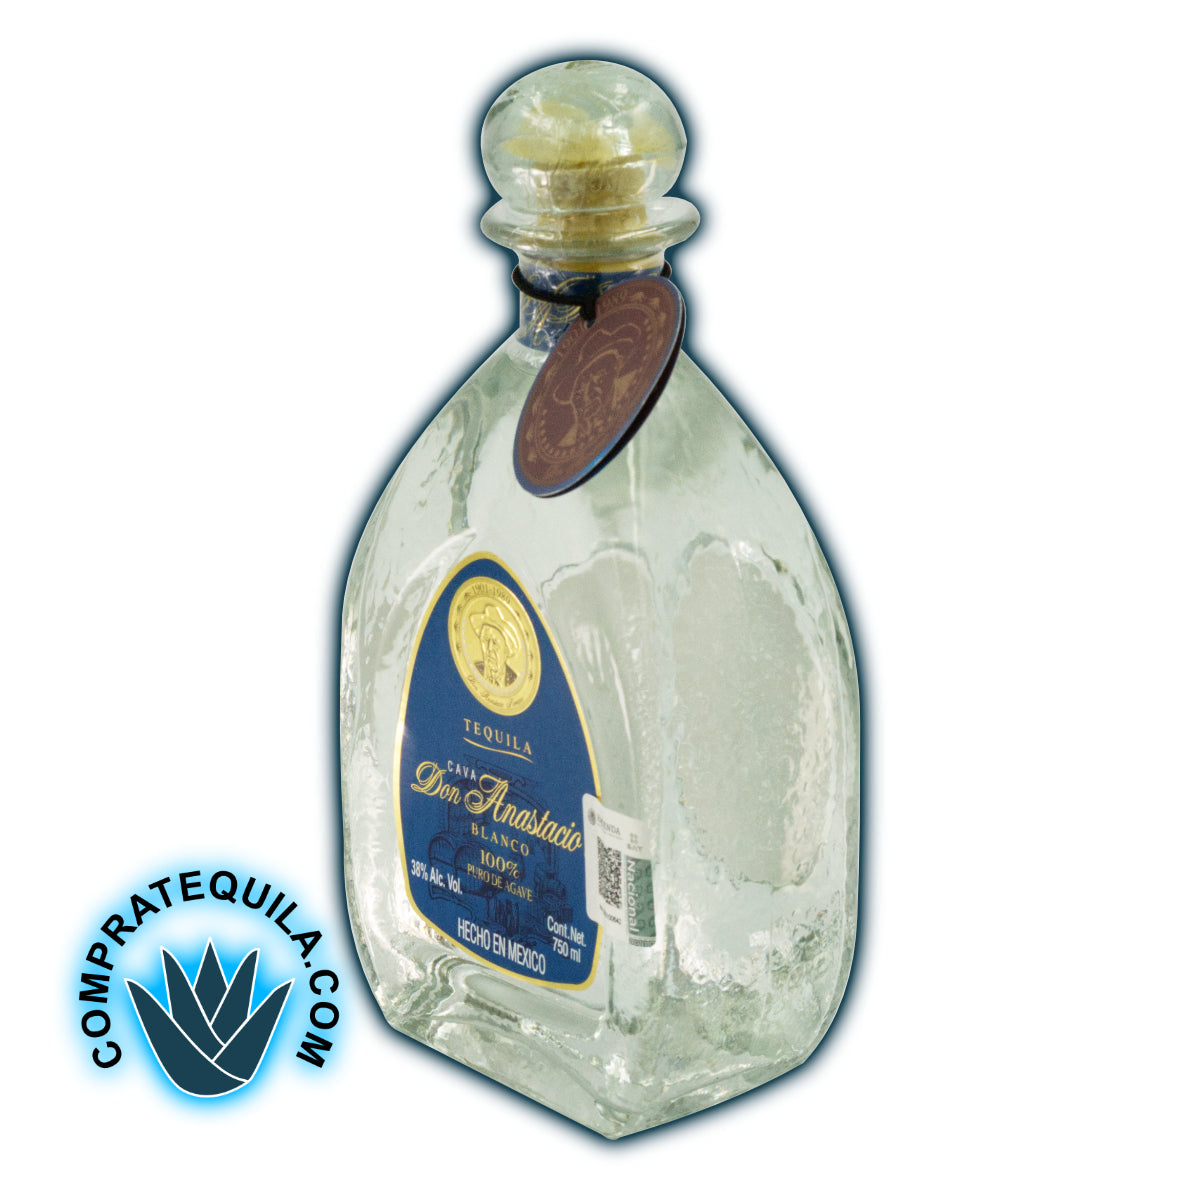 Don Anastacio Blanco Tequila: The perfection of flavor in every sip, available at Compratequila.com